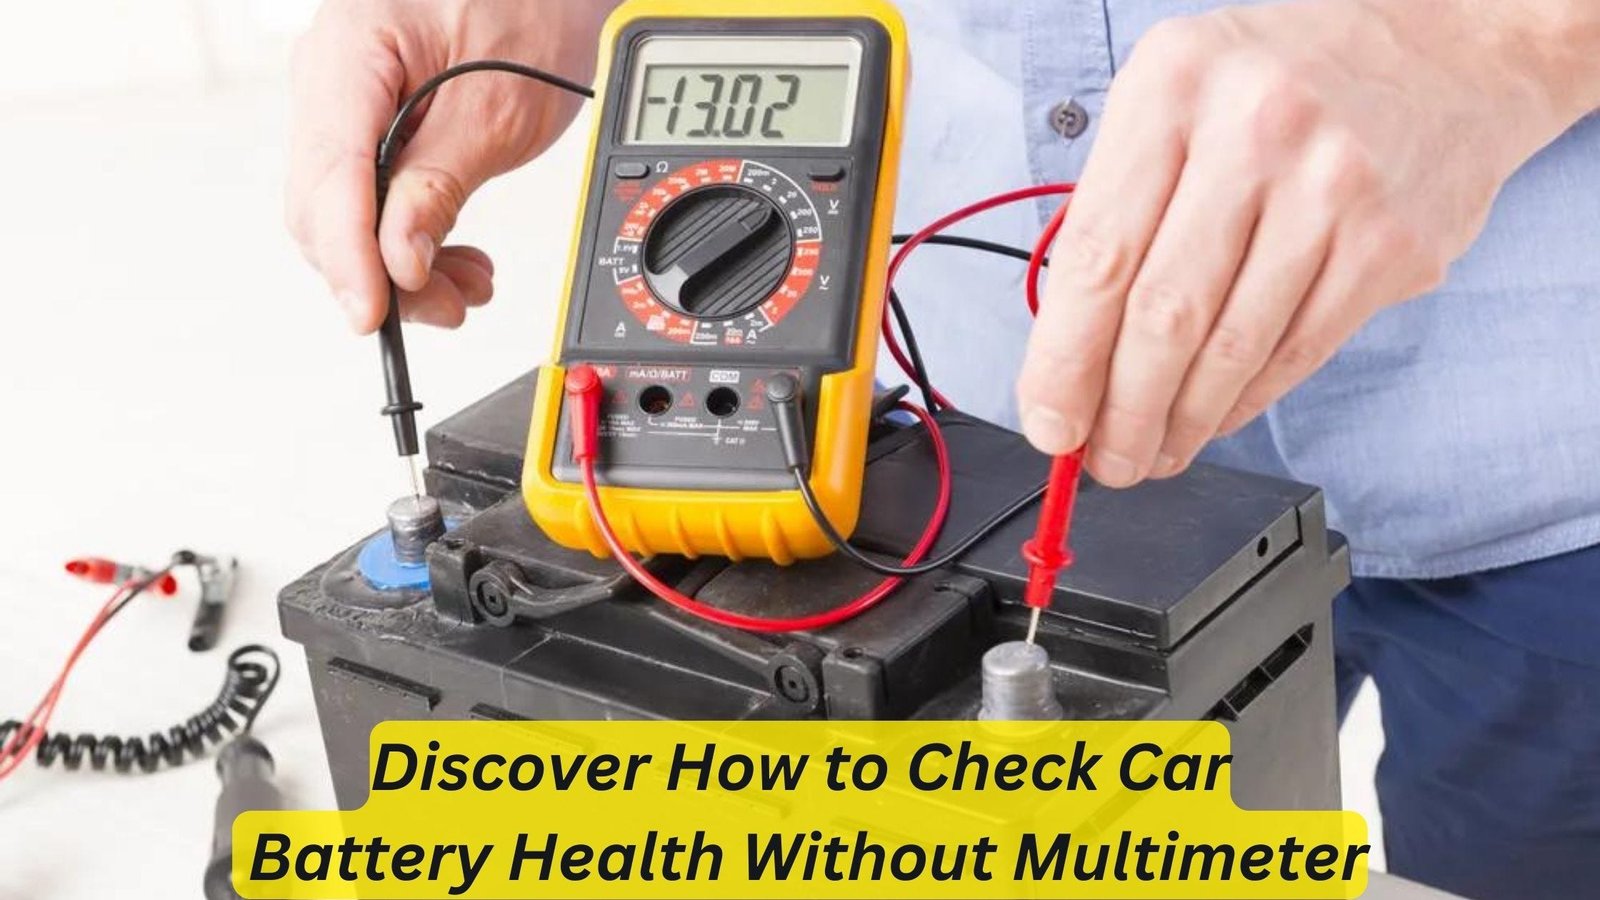 How to Check Car Battery Health Without Multimeter